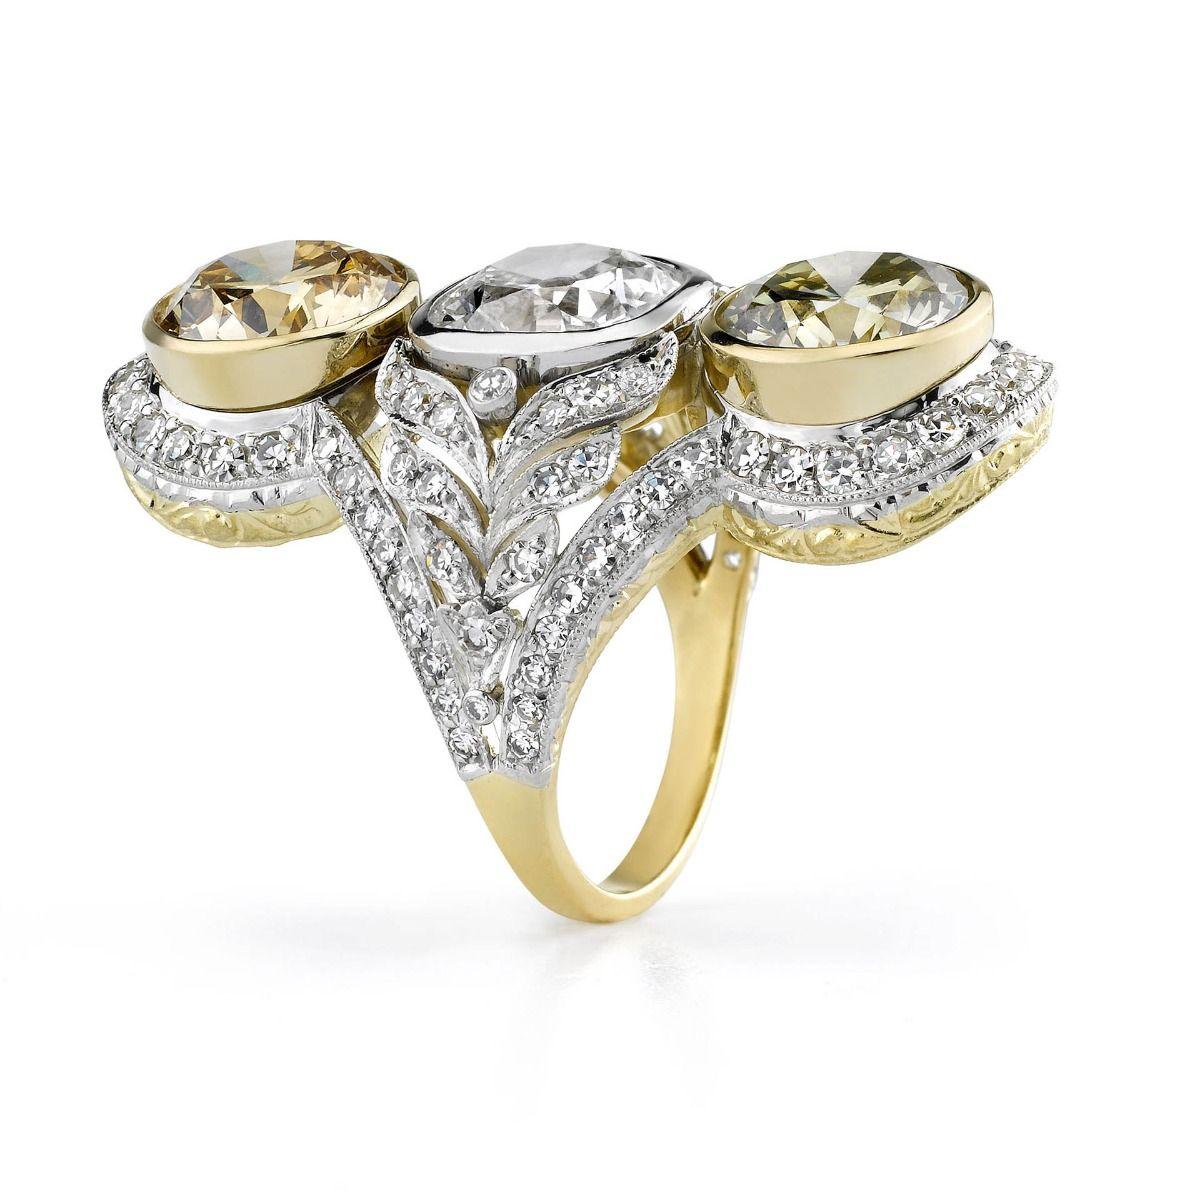 Contemporary Neil Lane Couture White & Colored Diamond, Platinum, 18k Gold Three Stone Ring For Sale